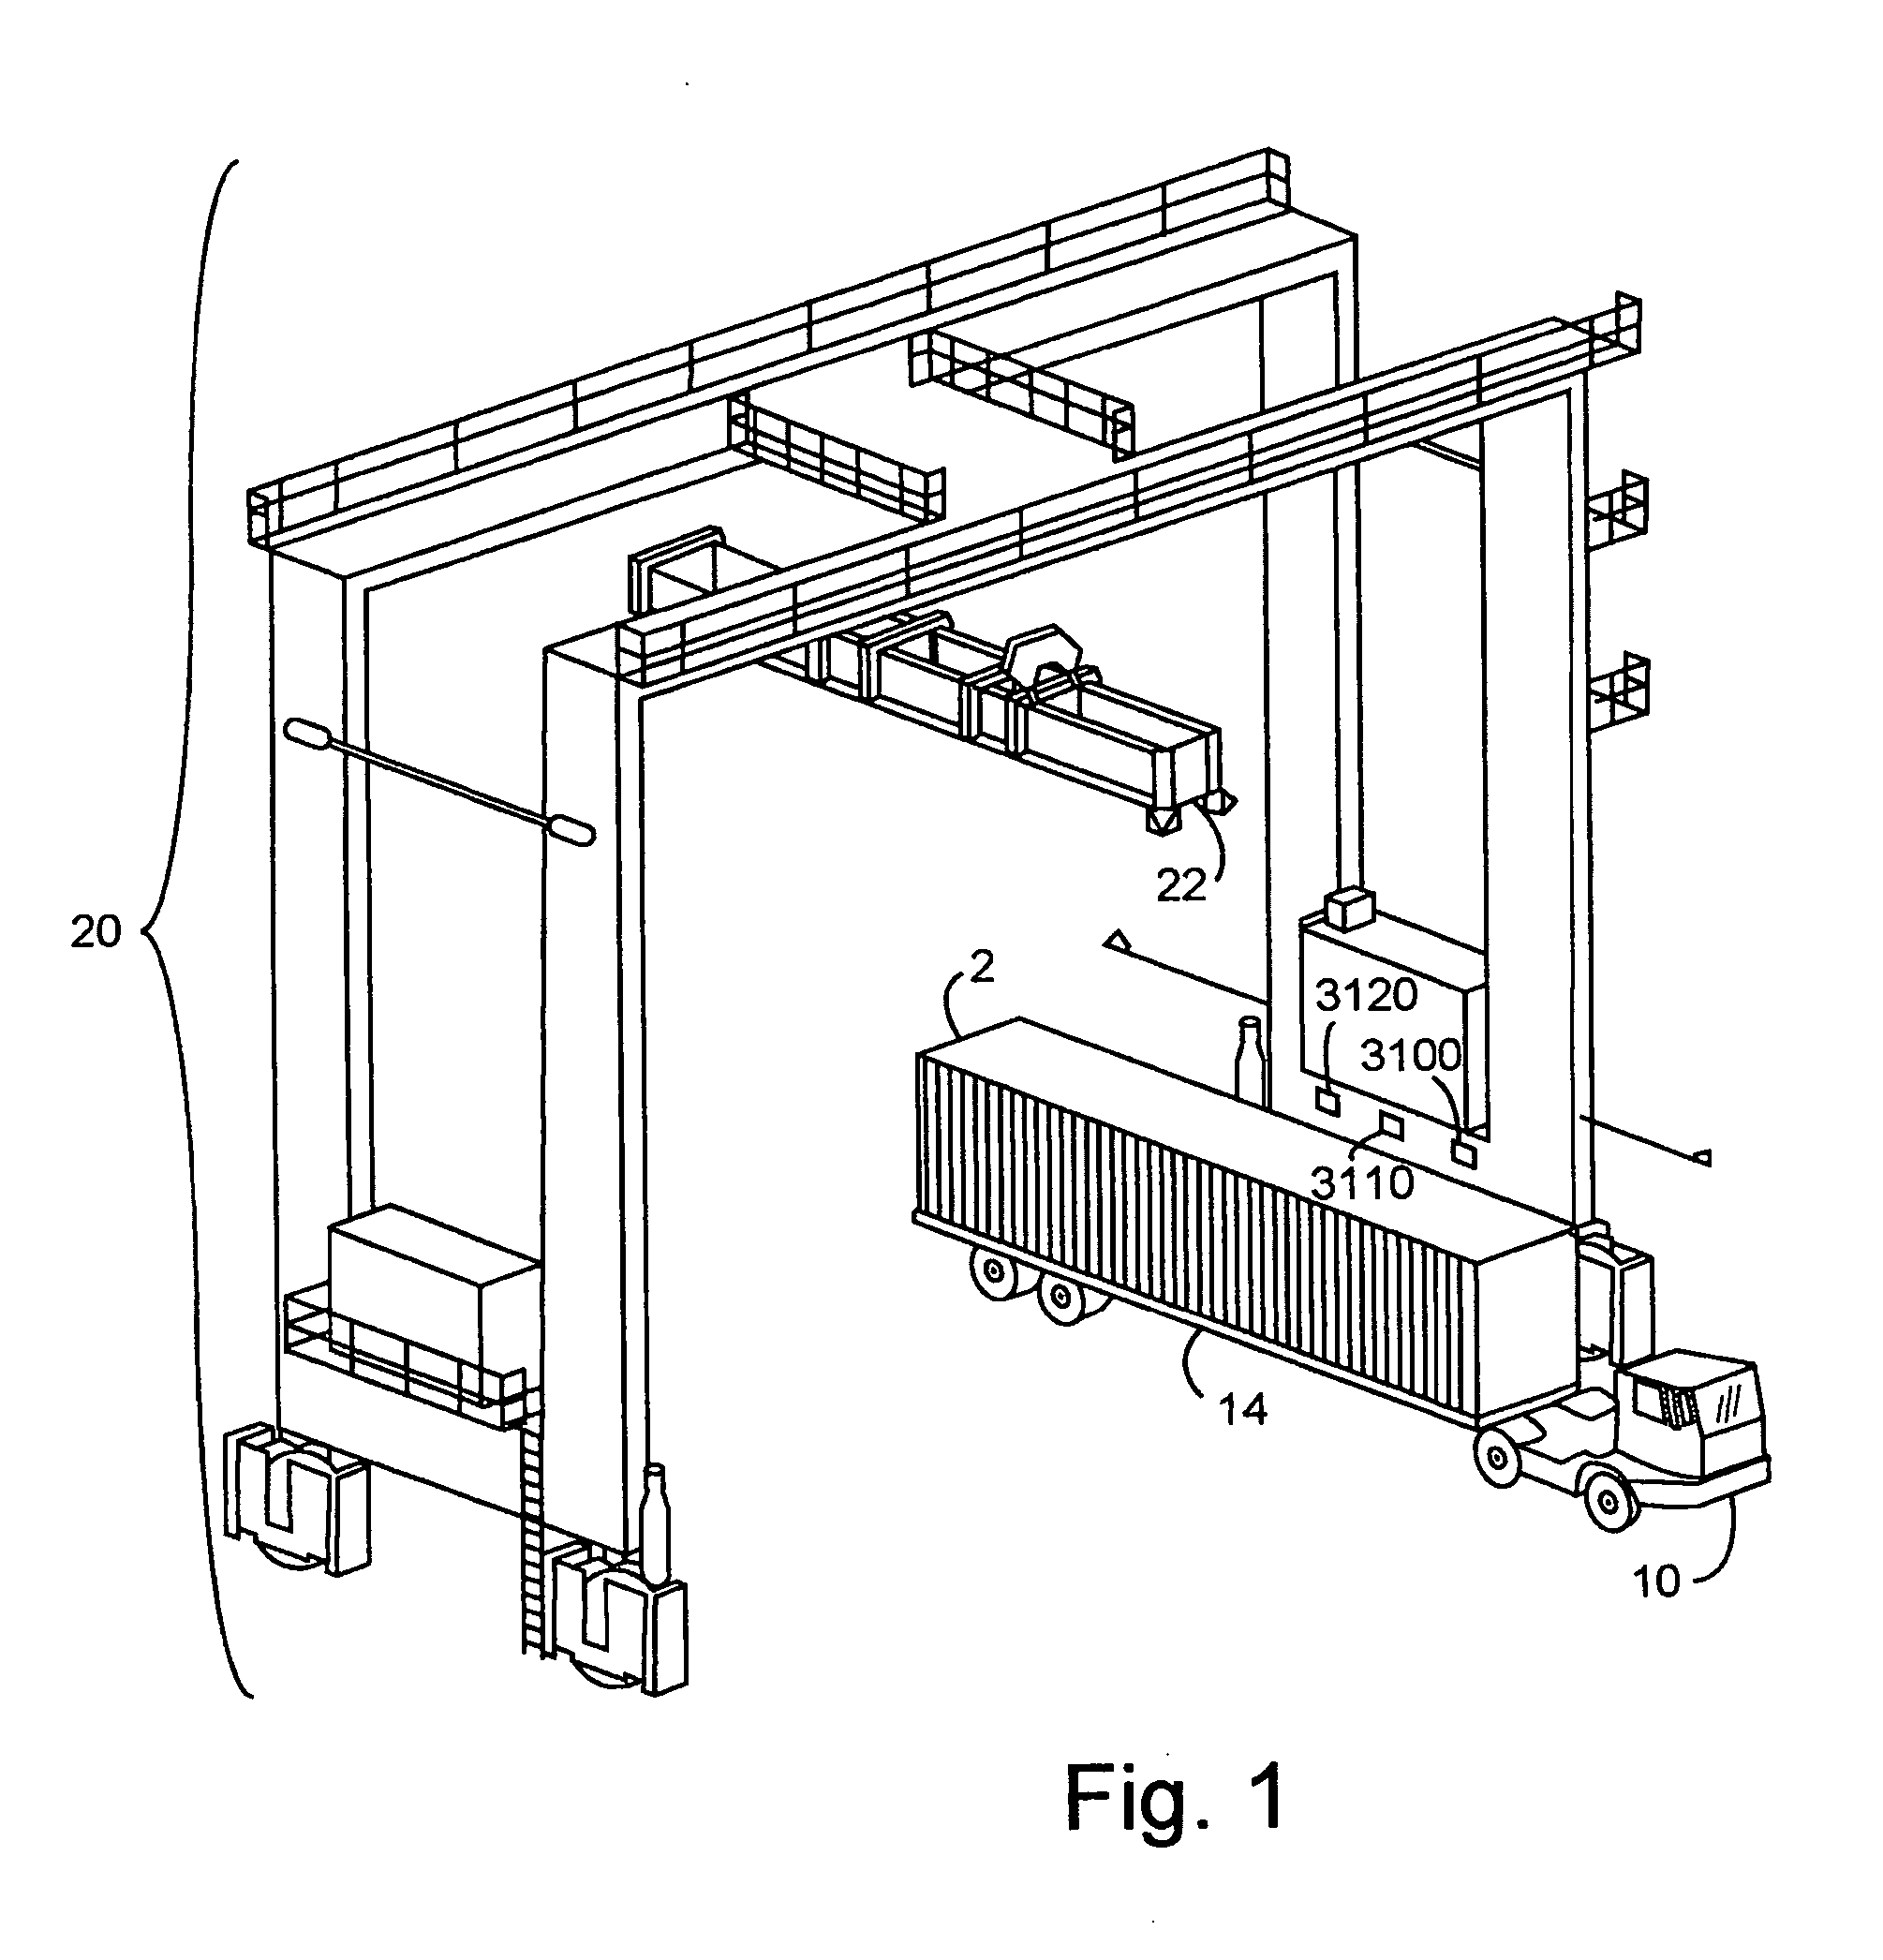 Method and apparatus for making status reporting devices for container handlers